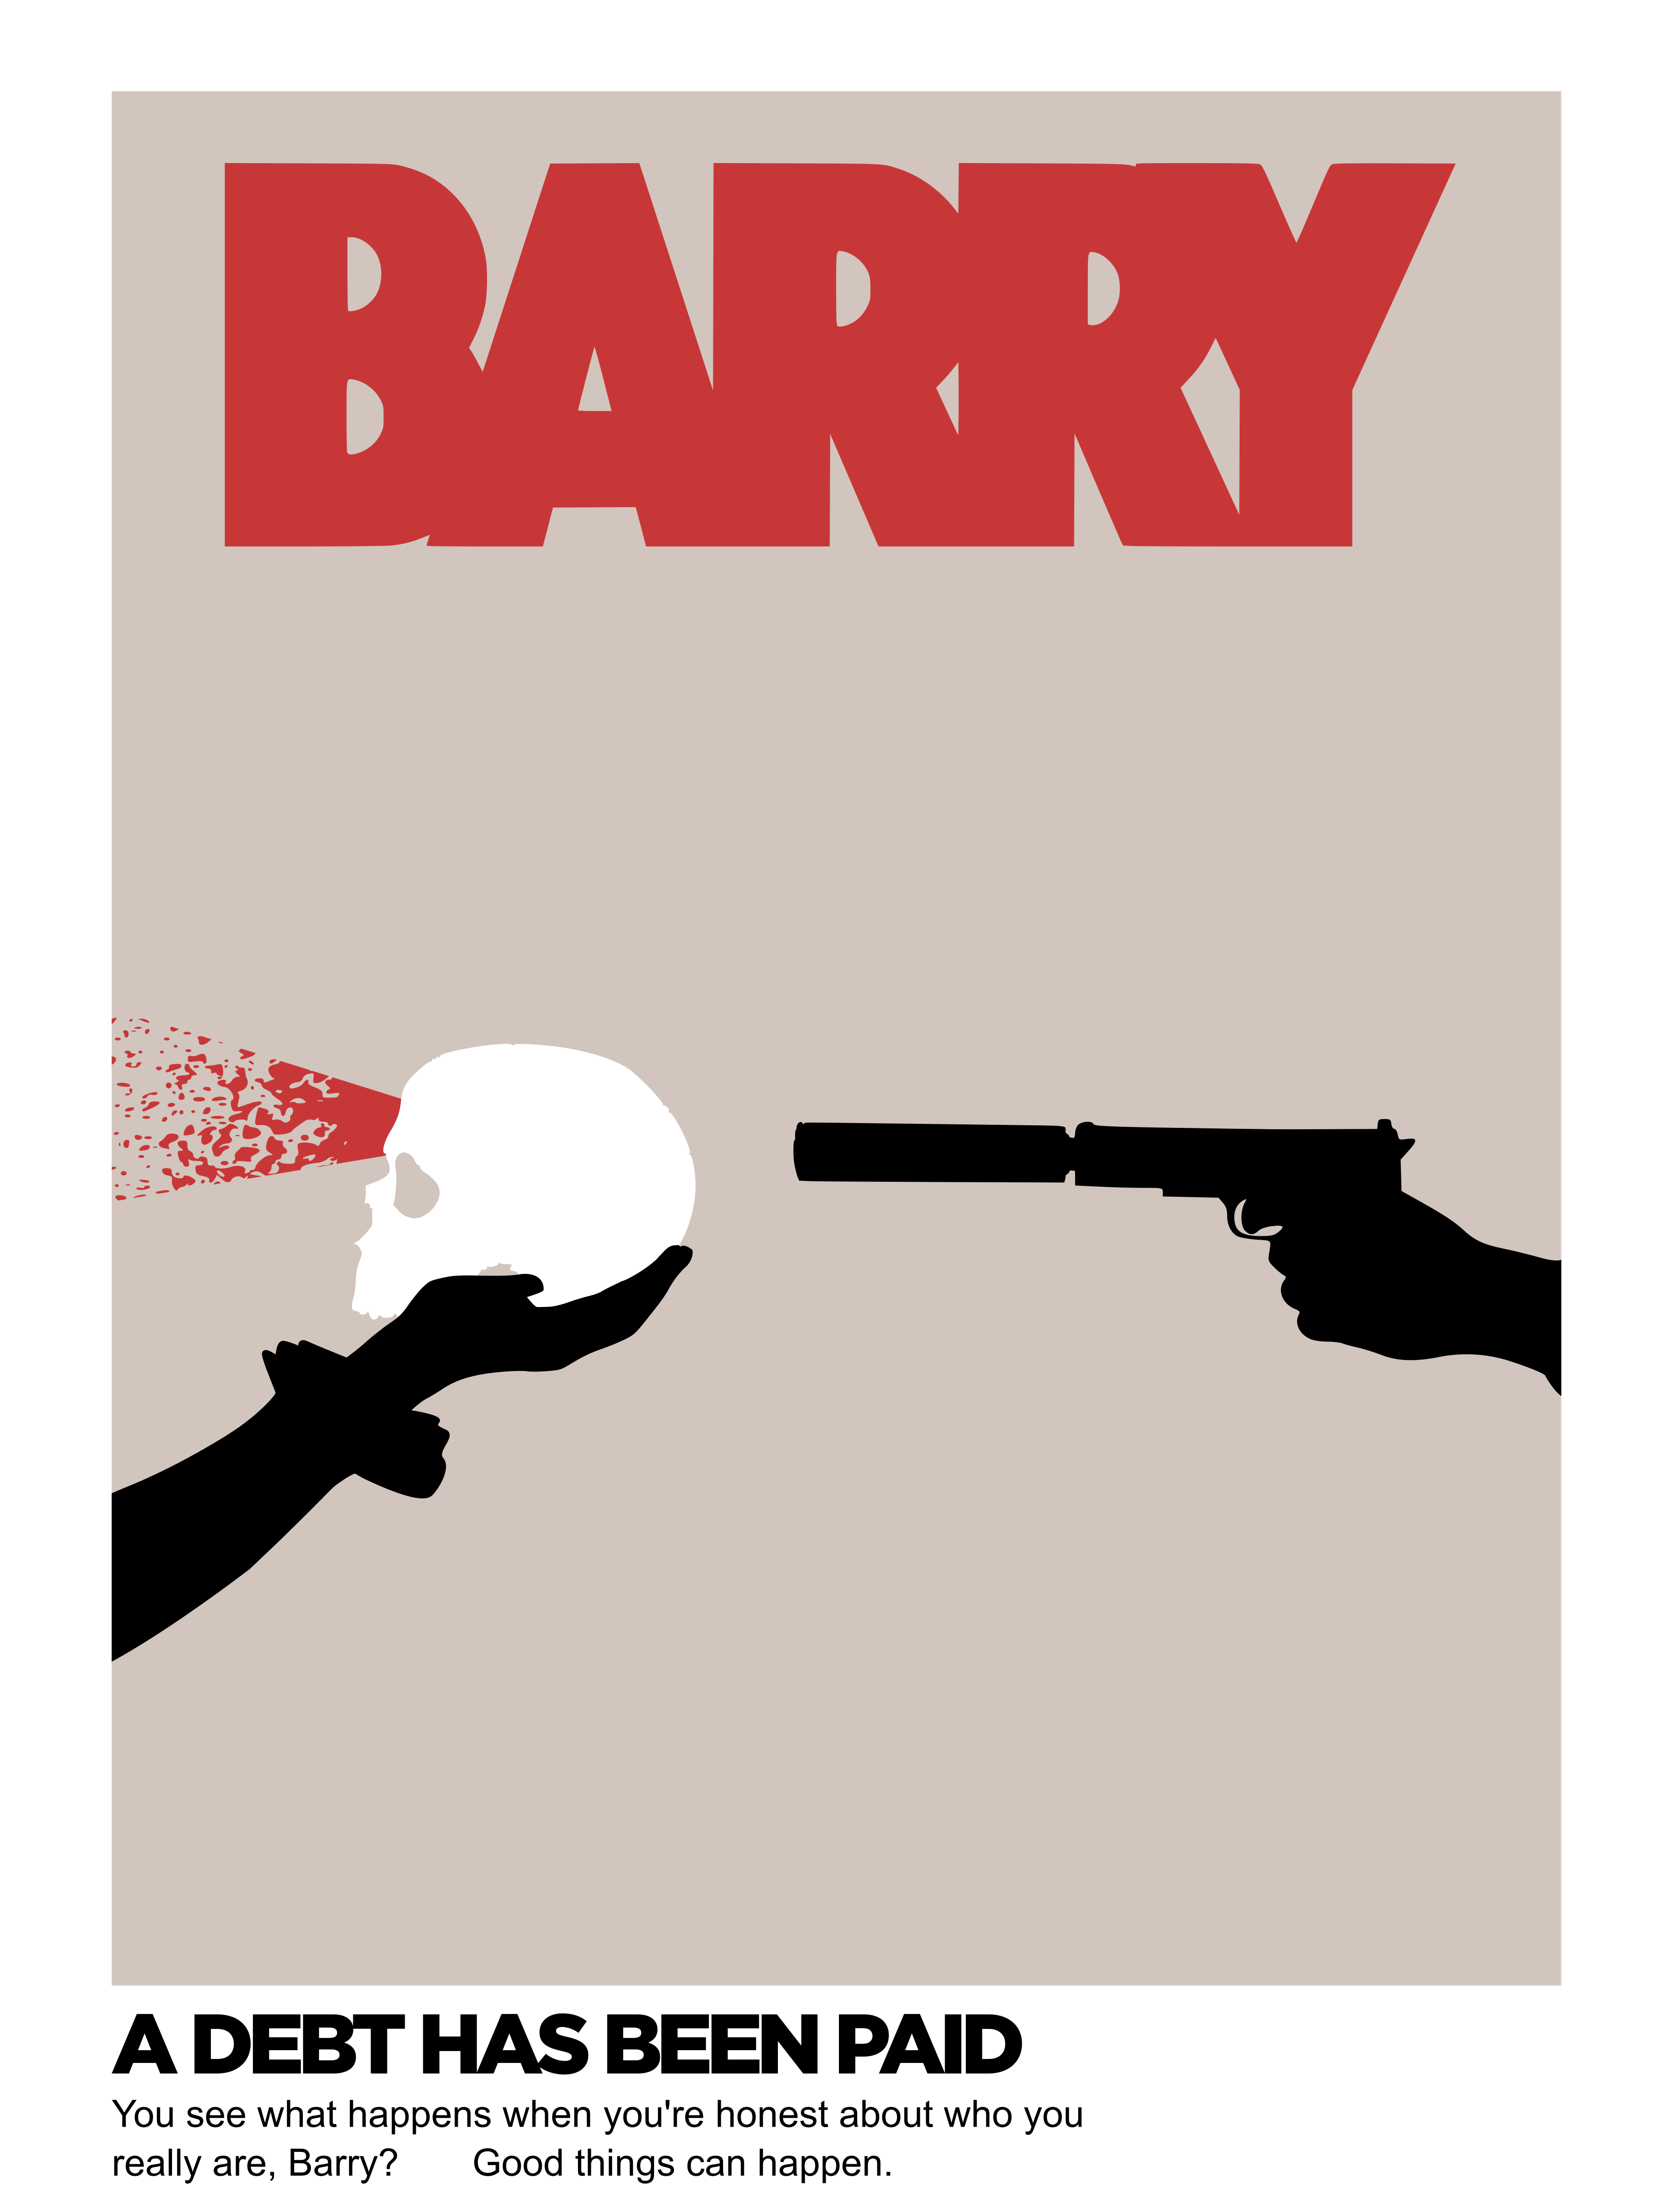 My minimalist take on a poster for HBO's BARRY. #logo #designer #graphic #inspirational #inspirationalquotes. Film posters minimalist, Greek tv show, Barry movie